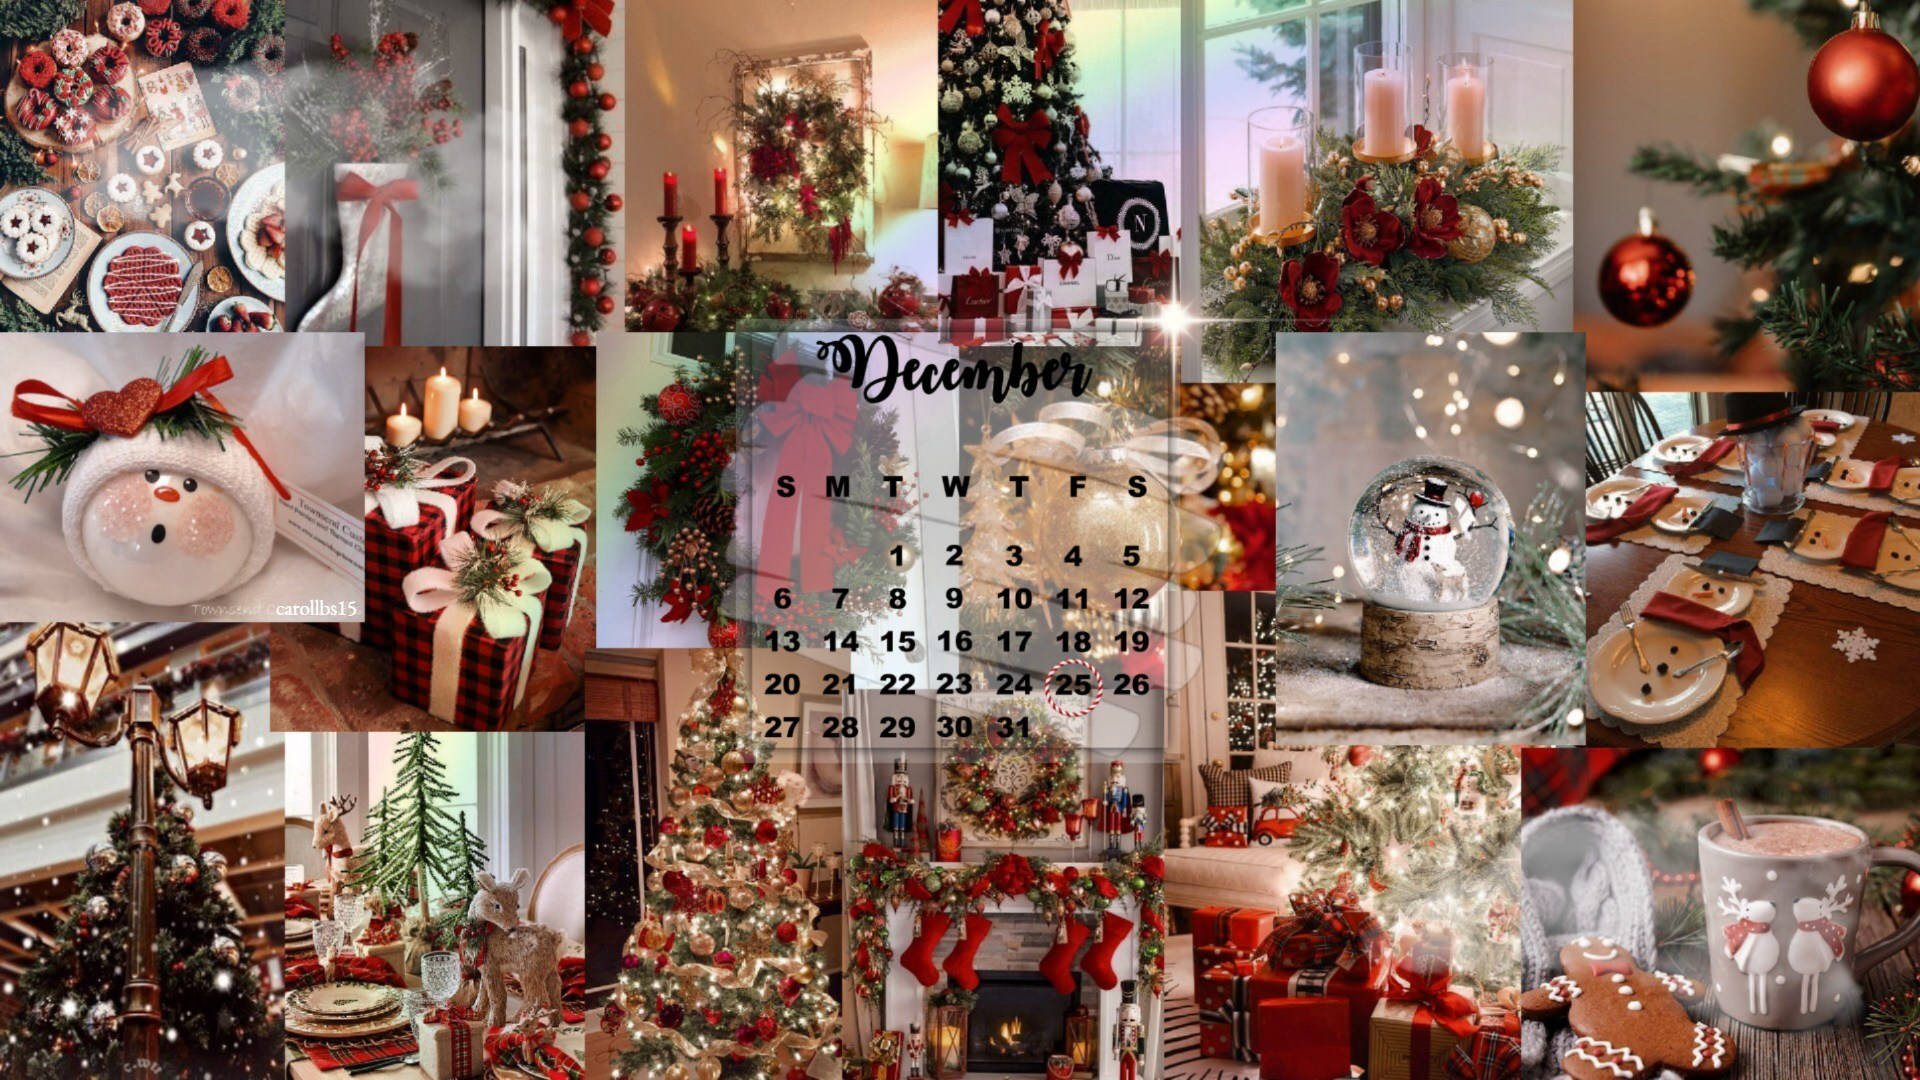 Download Christmas Collage With Calendar Wallpaper 